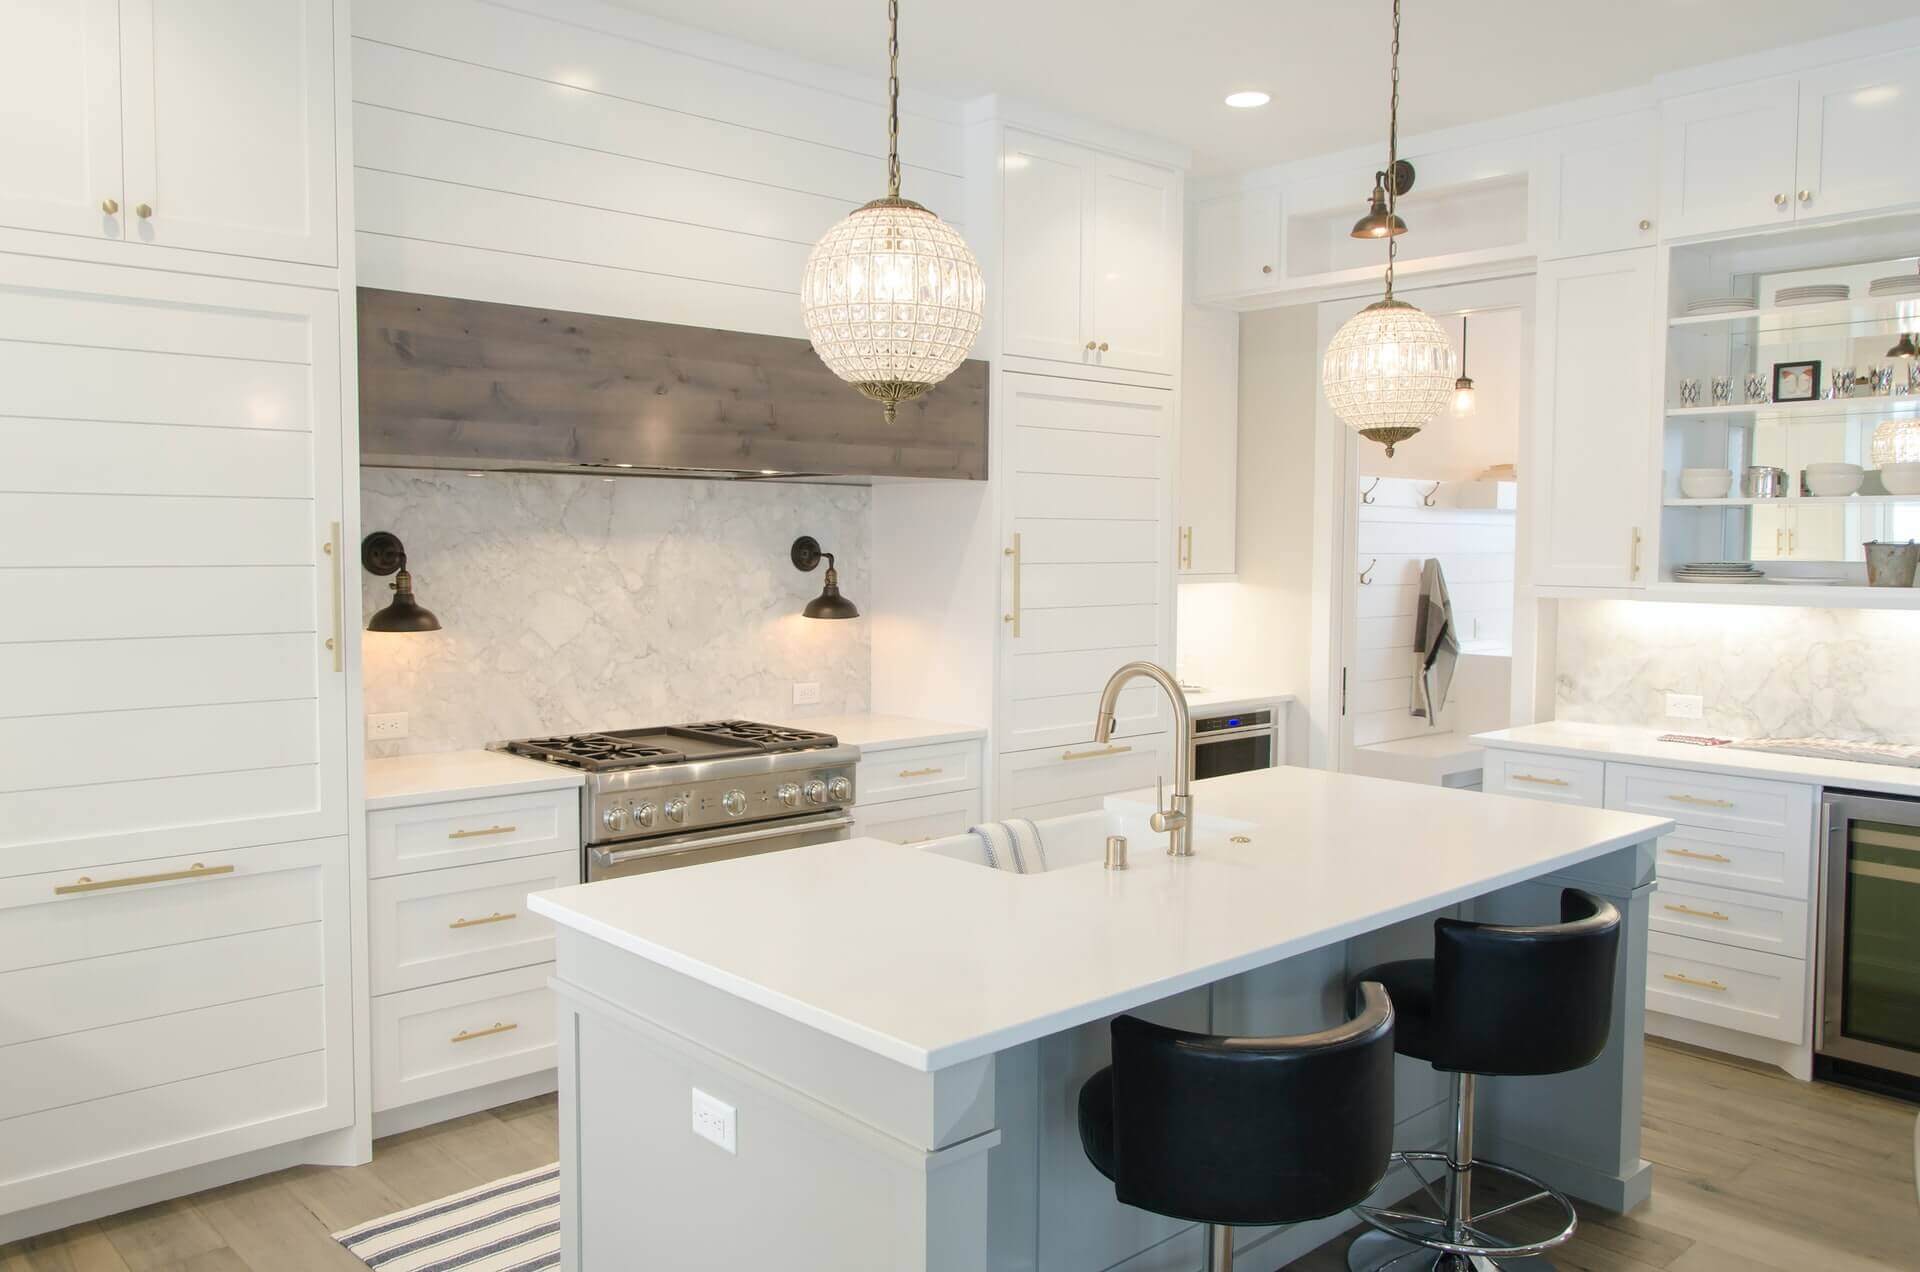 modern white kitchen cabinets with pendant light fixtures over island